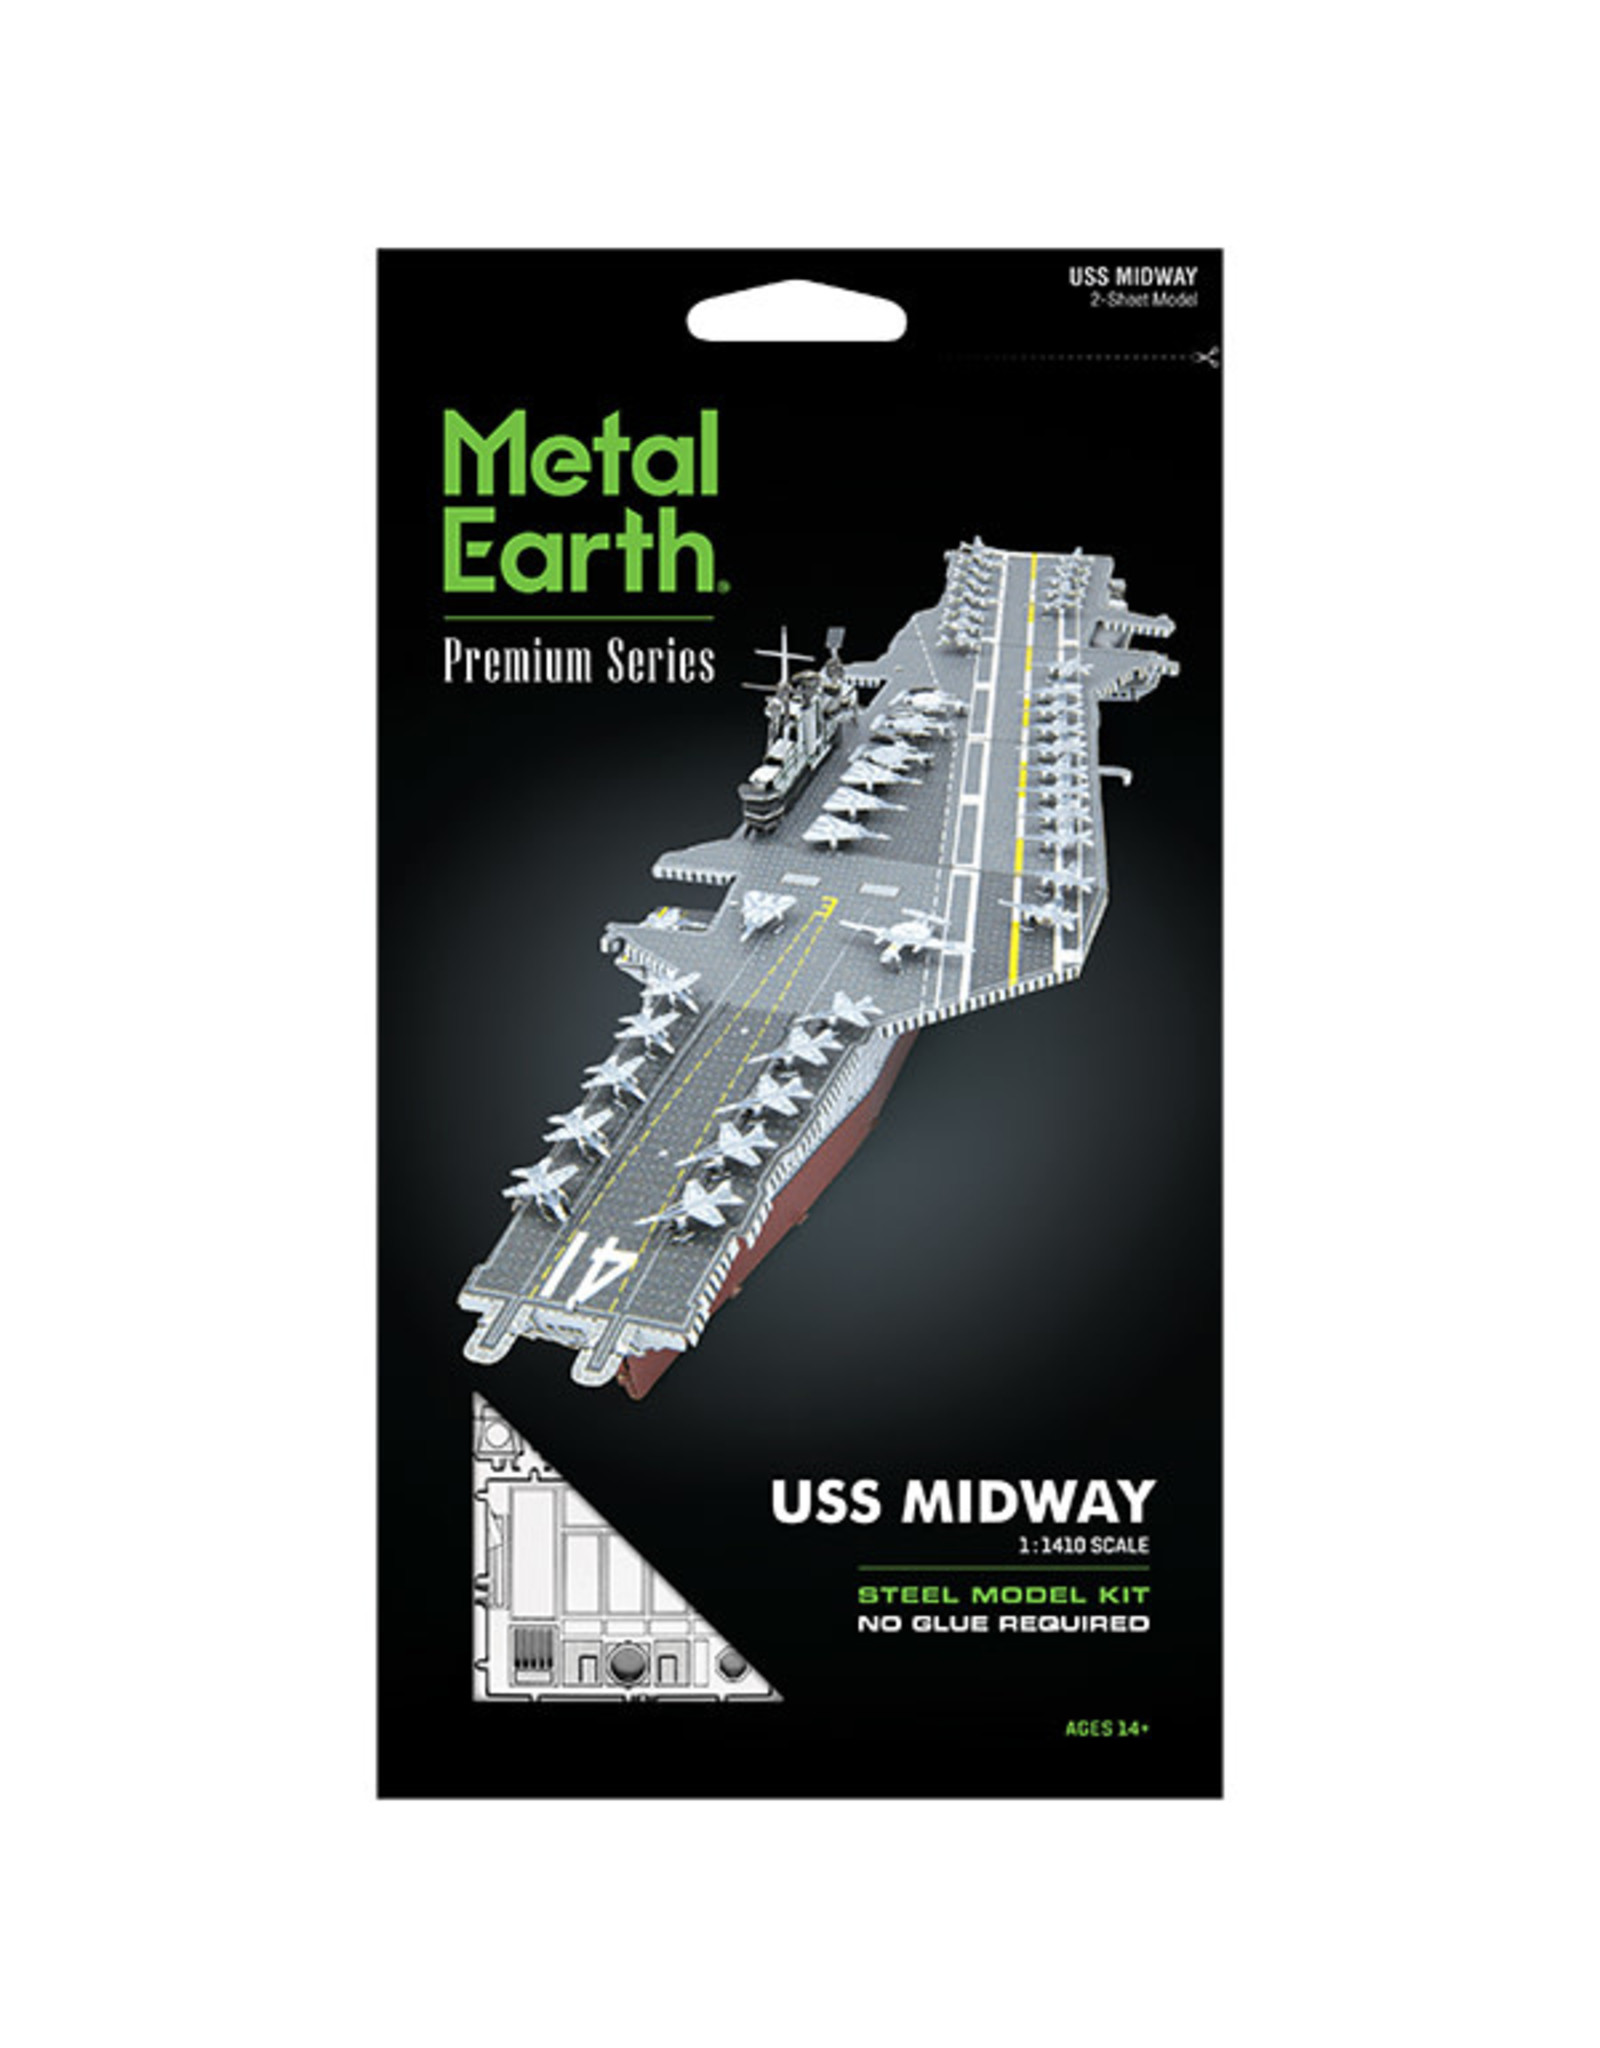 Metal Earth USS Midway